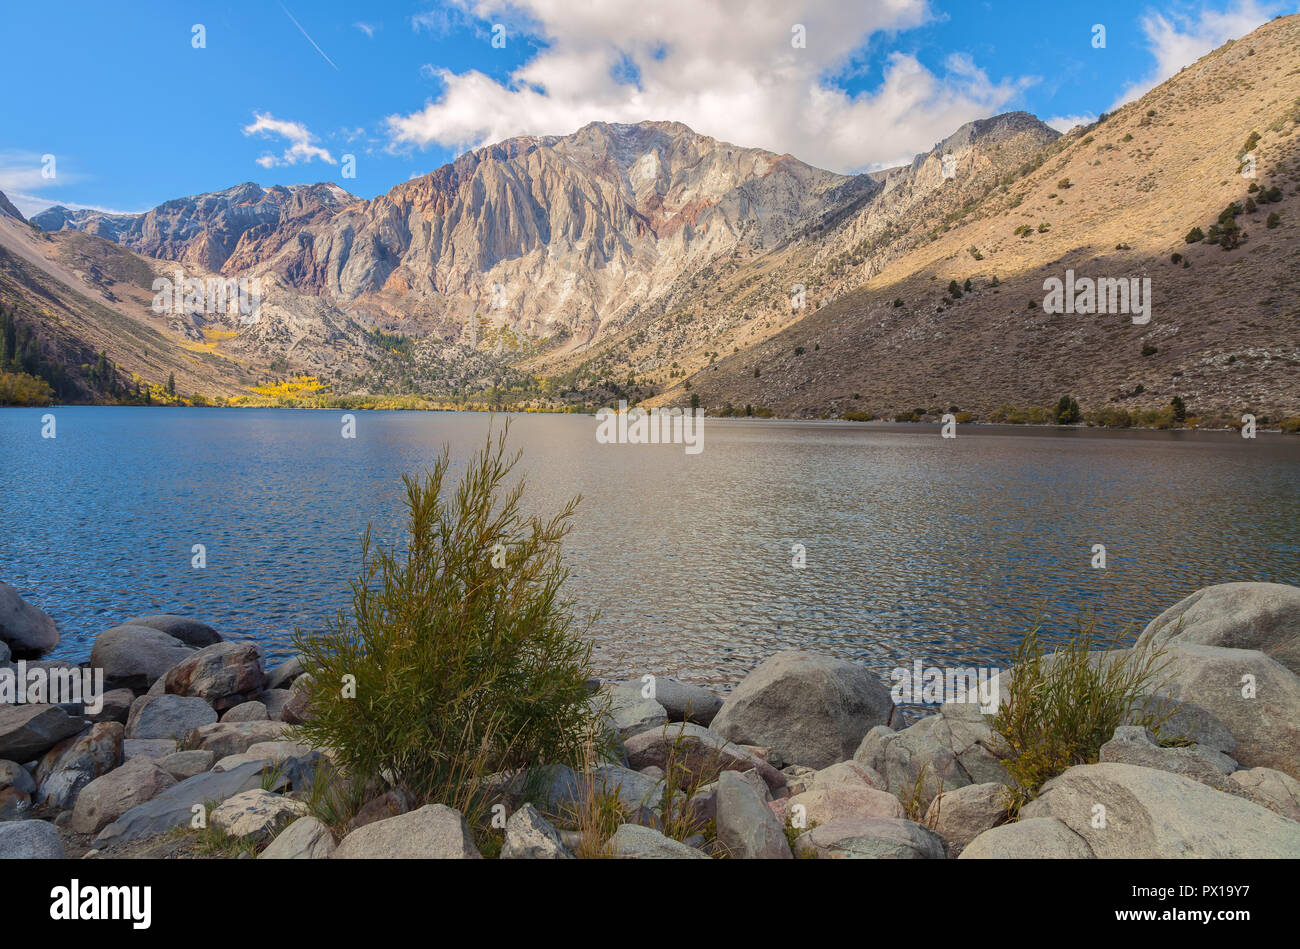 Convict Lake, with Laurel Mountain and the fall foliage, Mono County, California, United States. Stock Photo